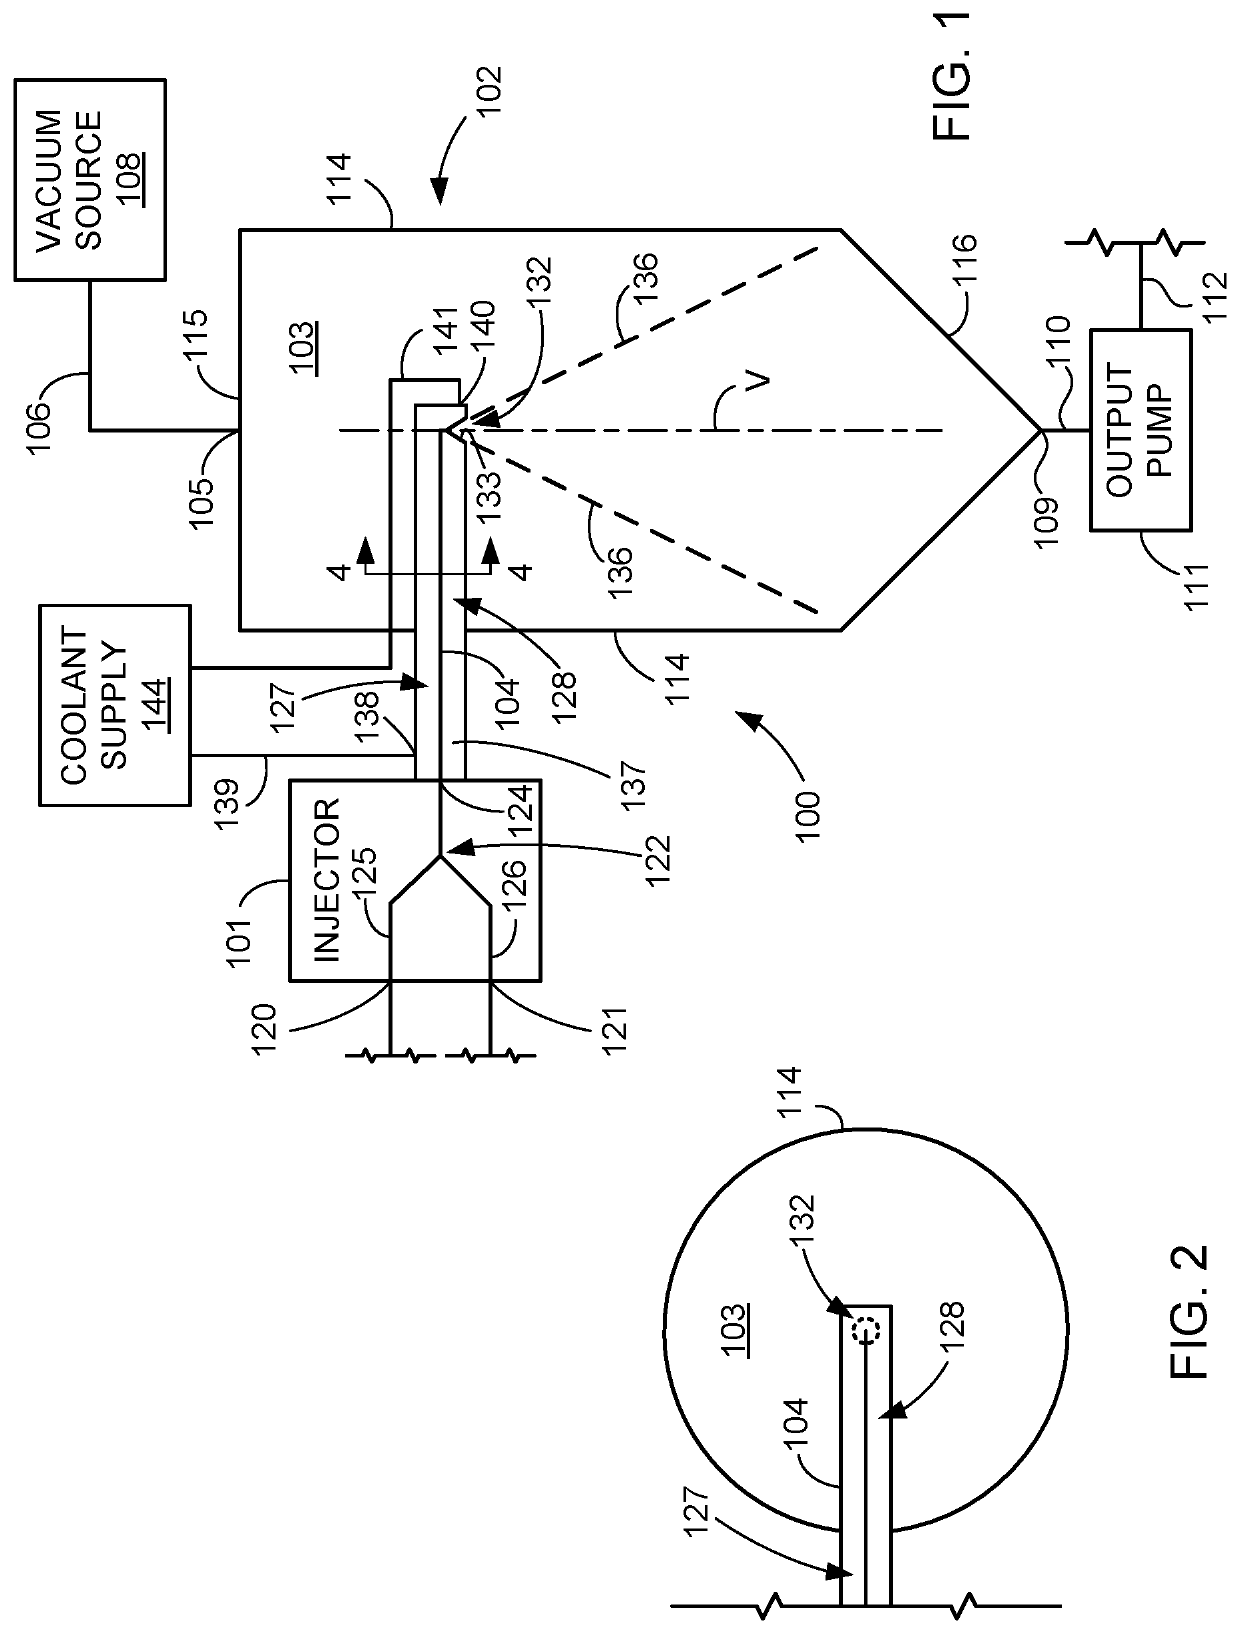 Systems and methods for receiving the output of a direct steam injector